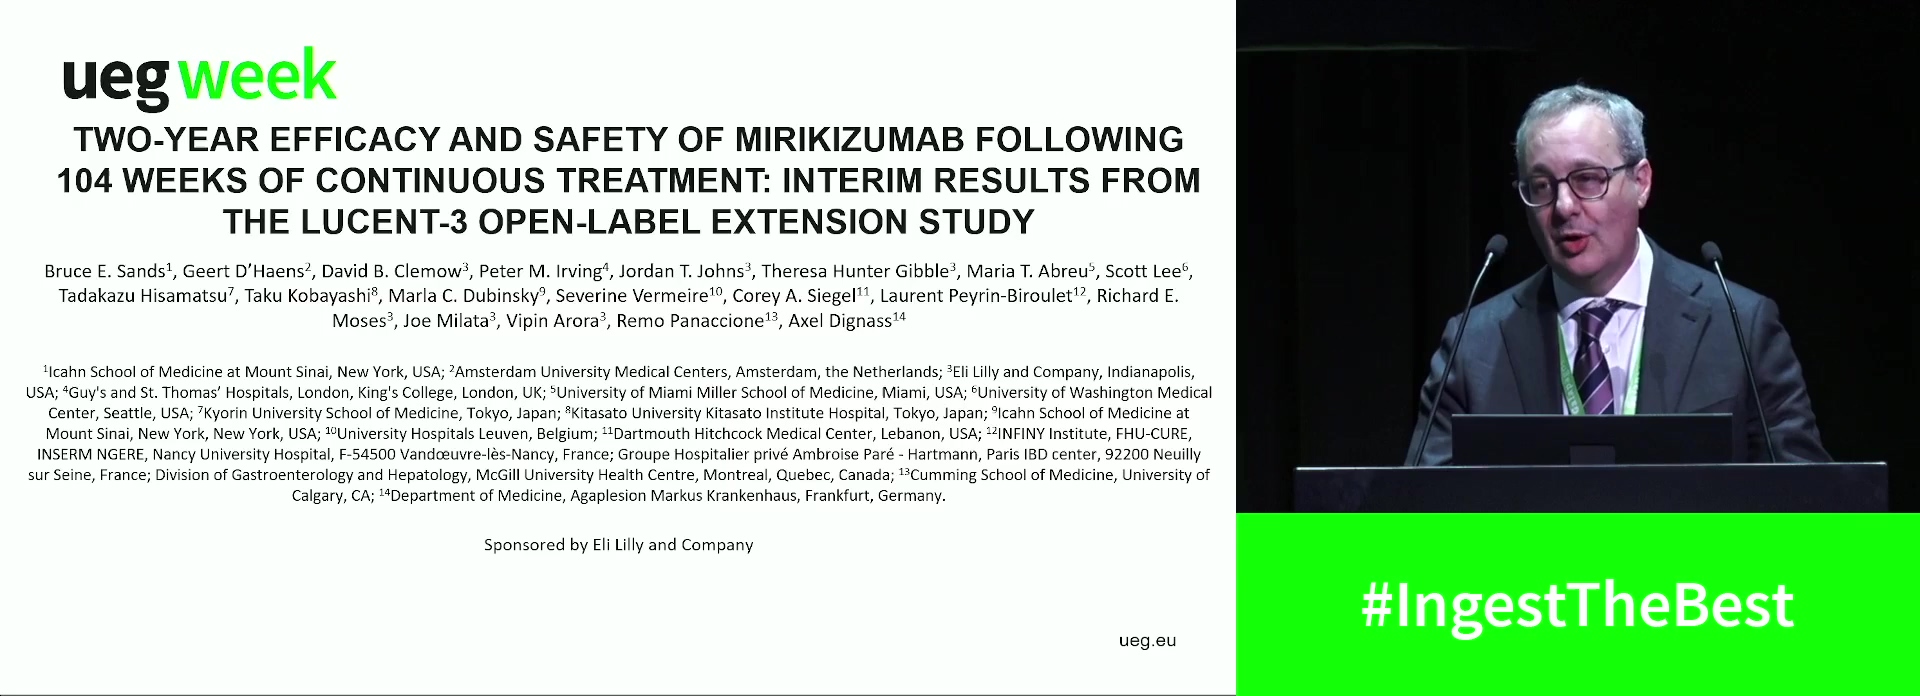 TWO-YEAR EFFICACY AND SAFETY OF MIRIKIZUMAB FOLLOWING 104 WEEKS OF CONTINUOUS TREATMENT: INTERIM RESULTS FROM THE LUCENT-3 OPEN-LABEL EXTENSION STUDY